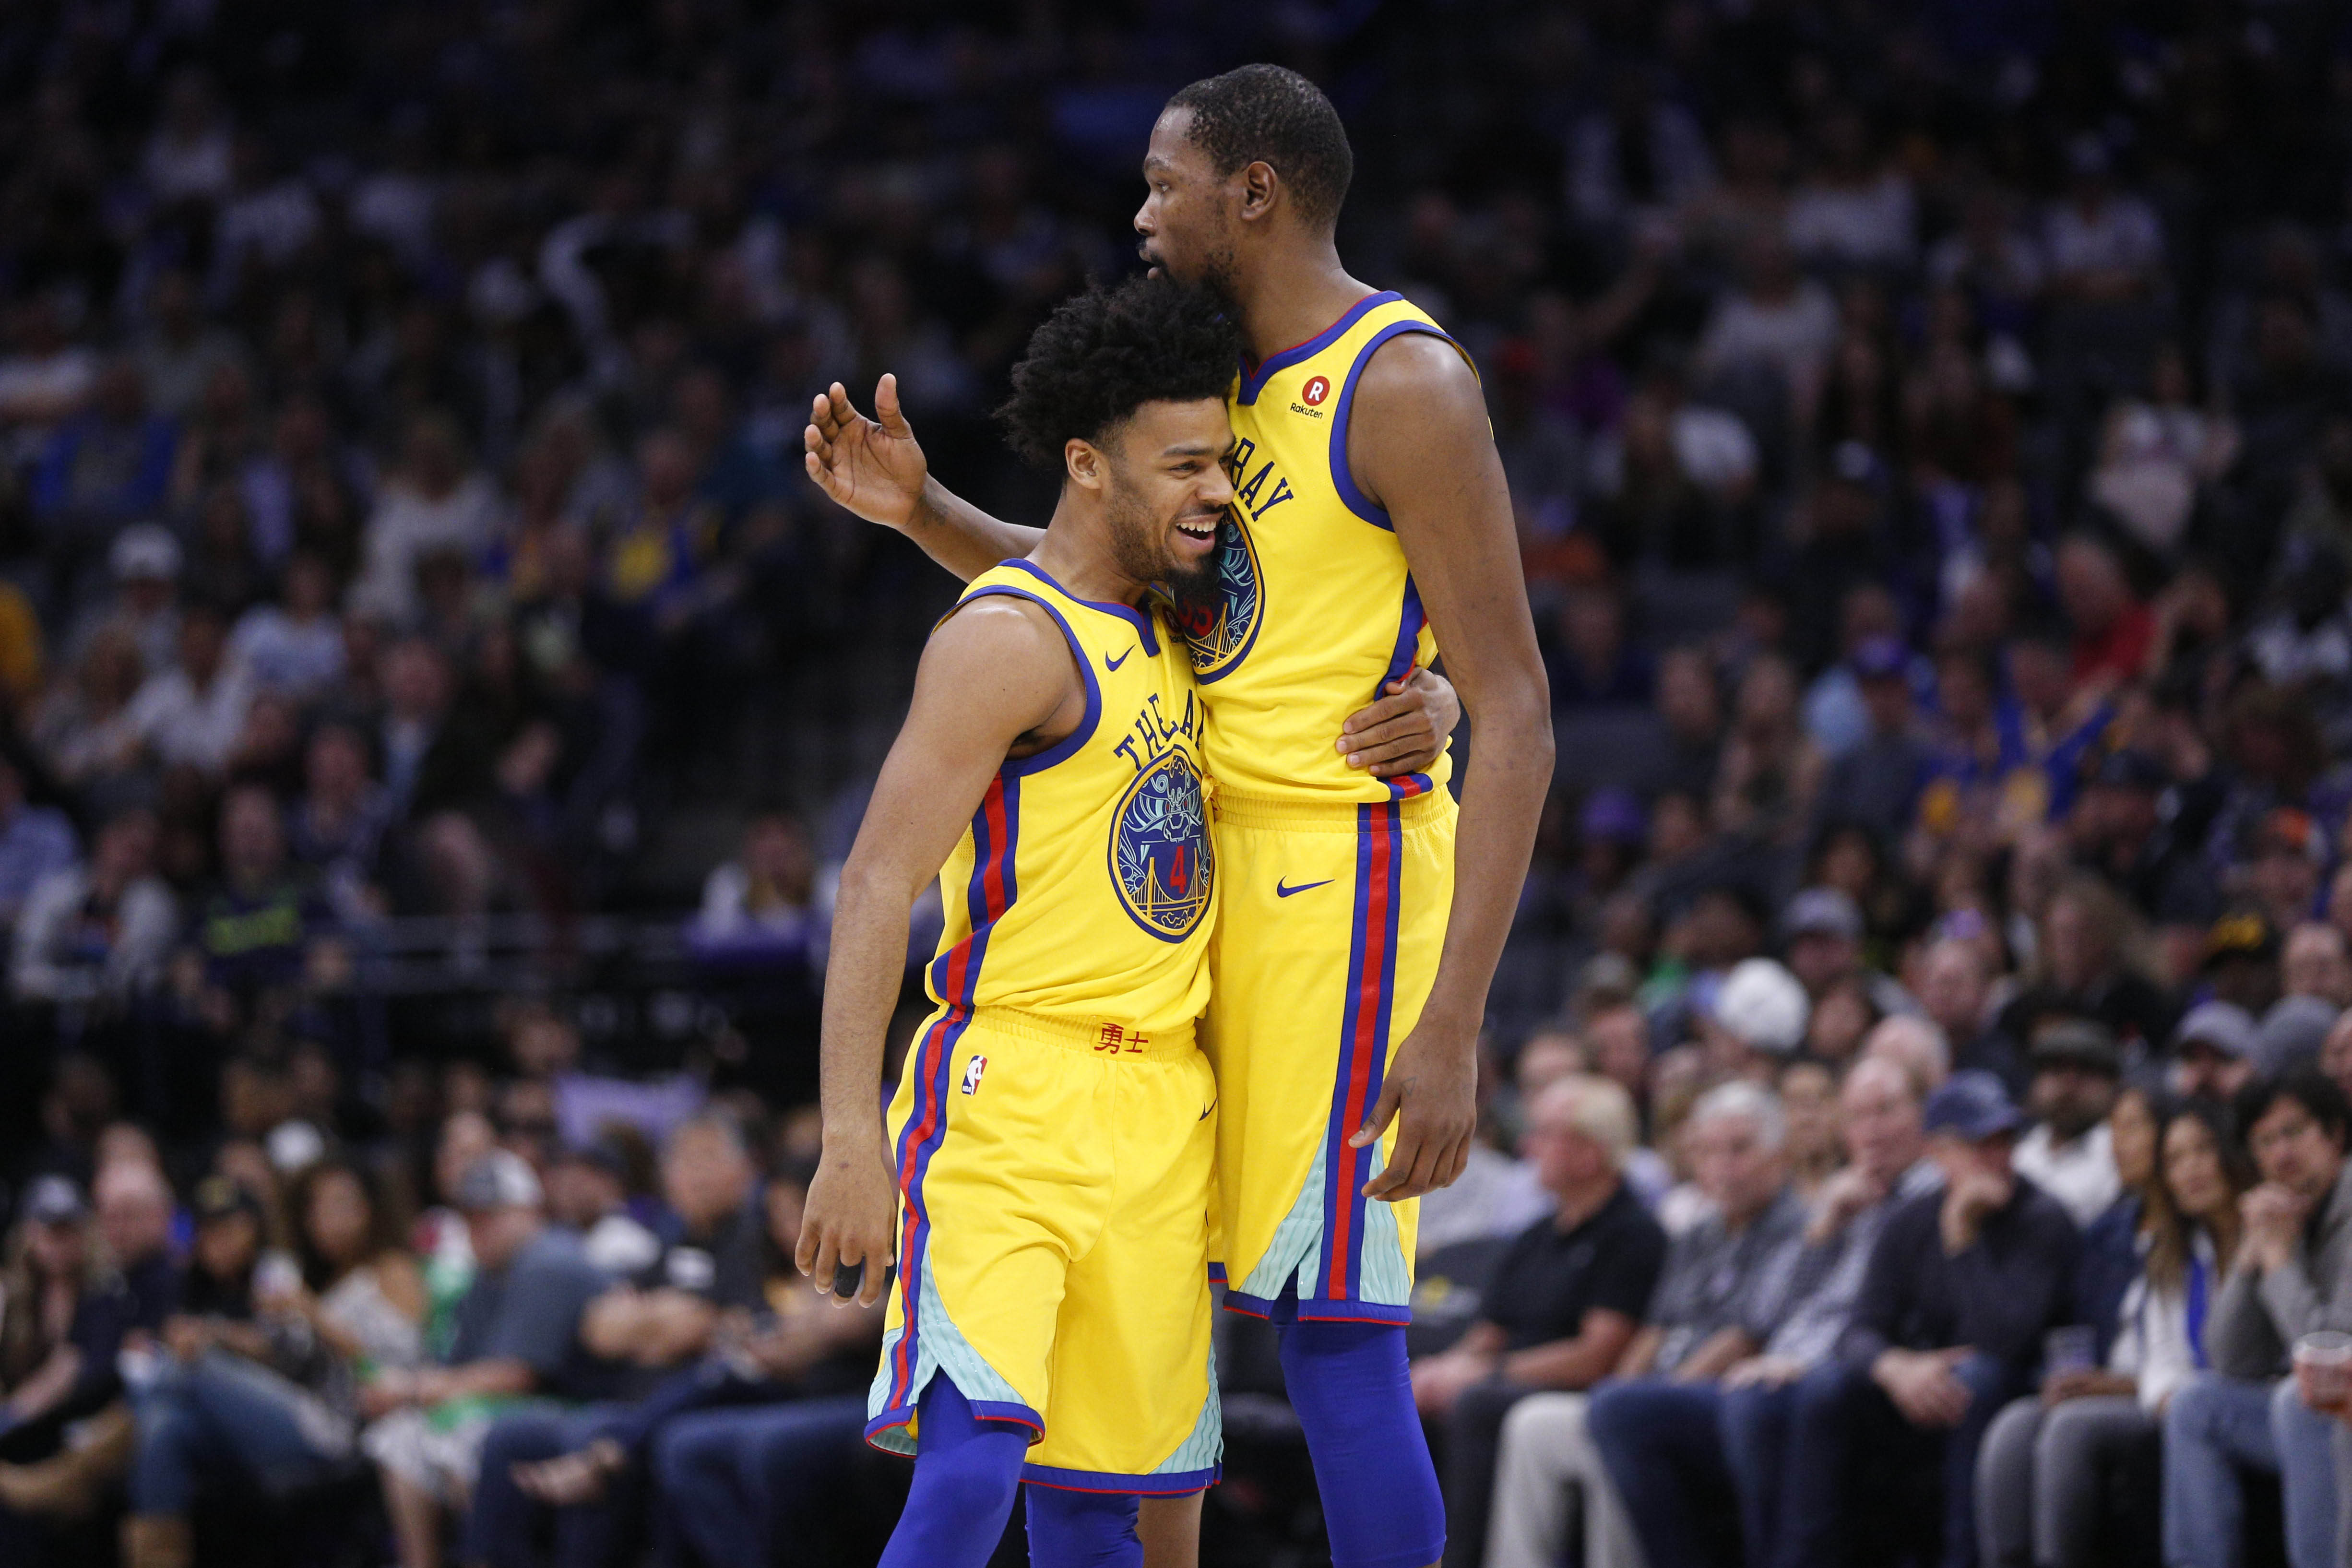 Mar 31, 2018; Sacramento, CA, USA; Golden State Warriors guard Quinn Cook (4) hugs forward Kevin Durant (35) after making a shot against the Sacramento Kings near the end of the third quarter at the Golden 1 Center.